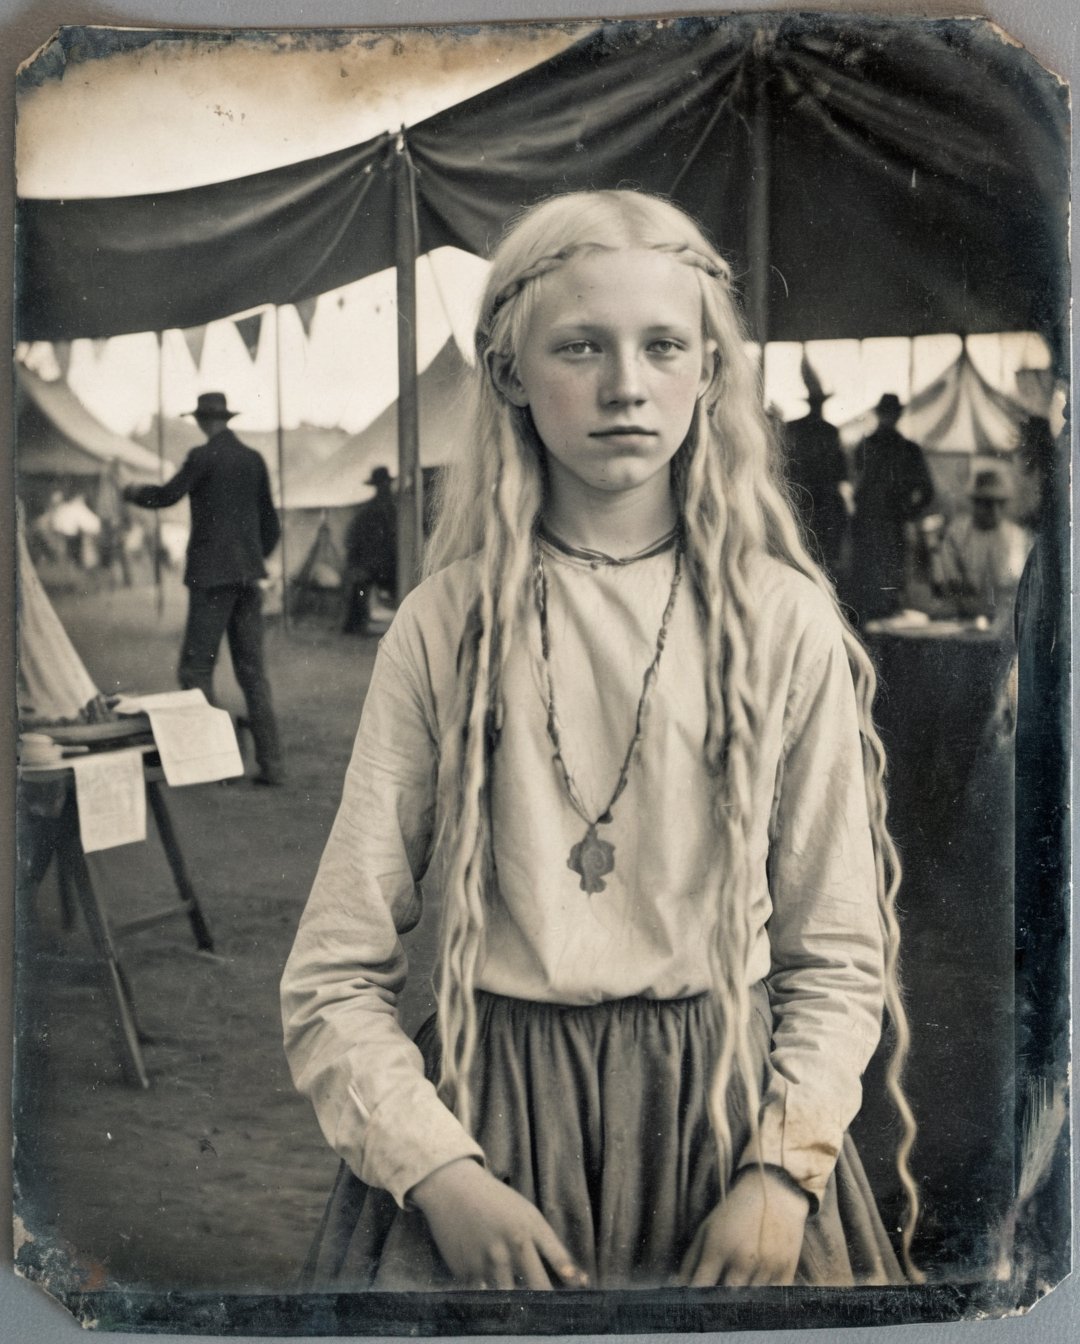 Daguerreotype photograph of a teenage albino girl, fortune teller at a 1920s carnival, very long tangled hair, dirty ragged clothing, dust bowl, great depression, banners, tents, rodenstock sironar-n, 210mm f/5.6, kodak t-max100, large format camera, Dorothea Lange, dagtime